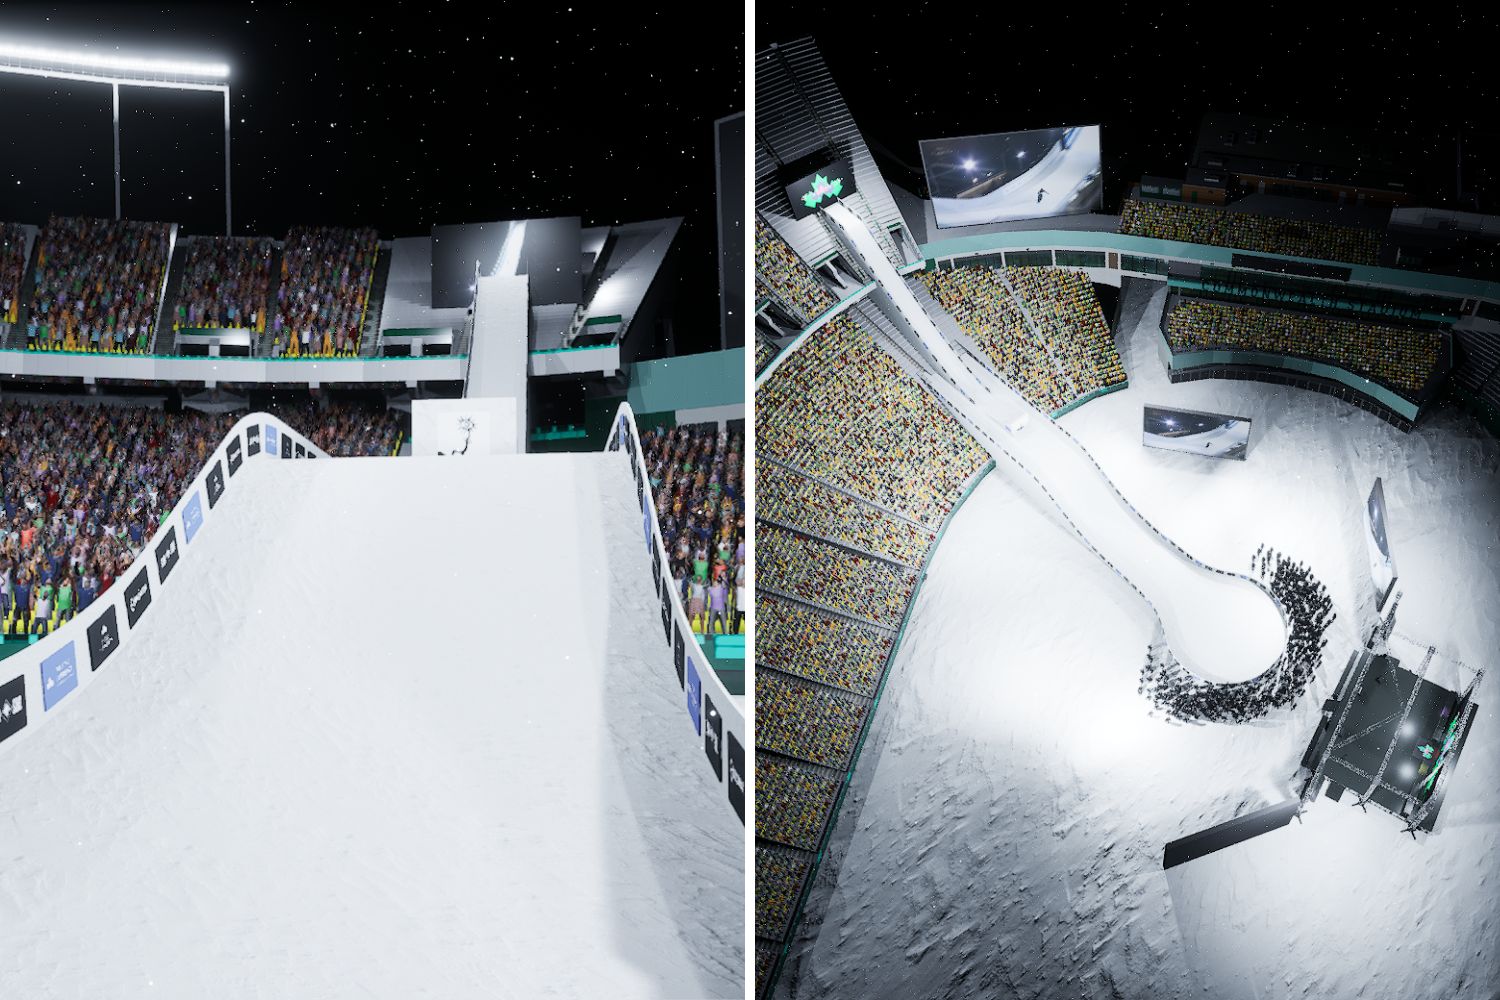 THE STYLE EXPERIENCE FIS STADIUM BIG AIR WORLD CUP